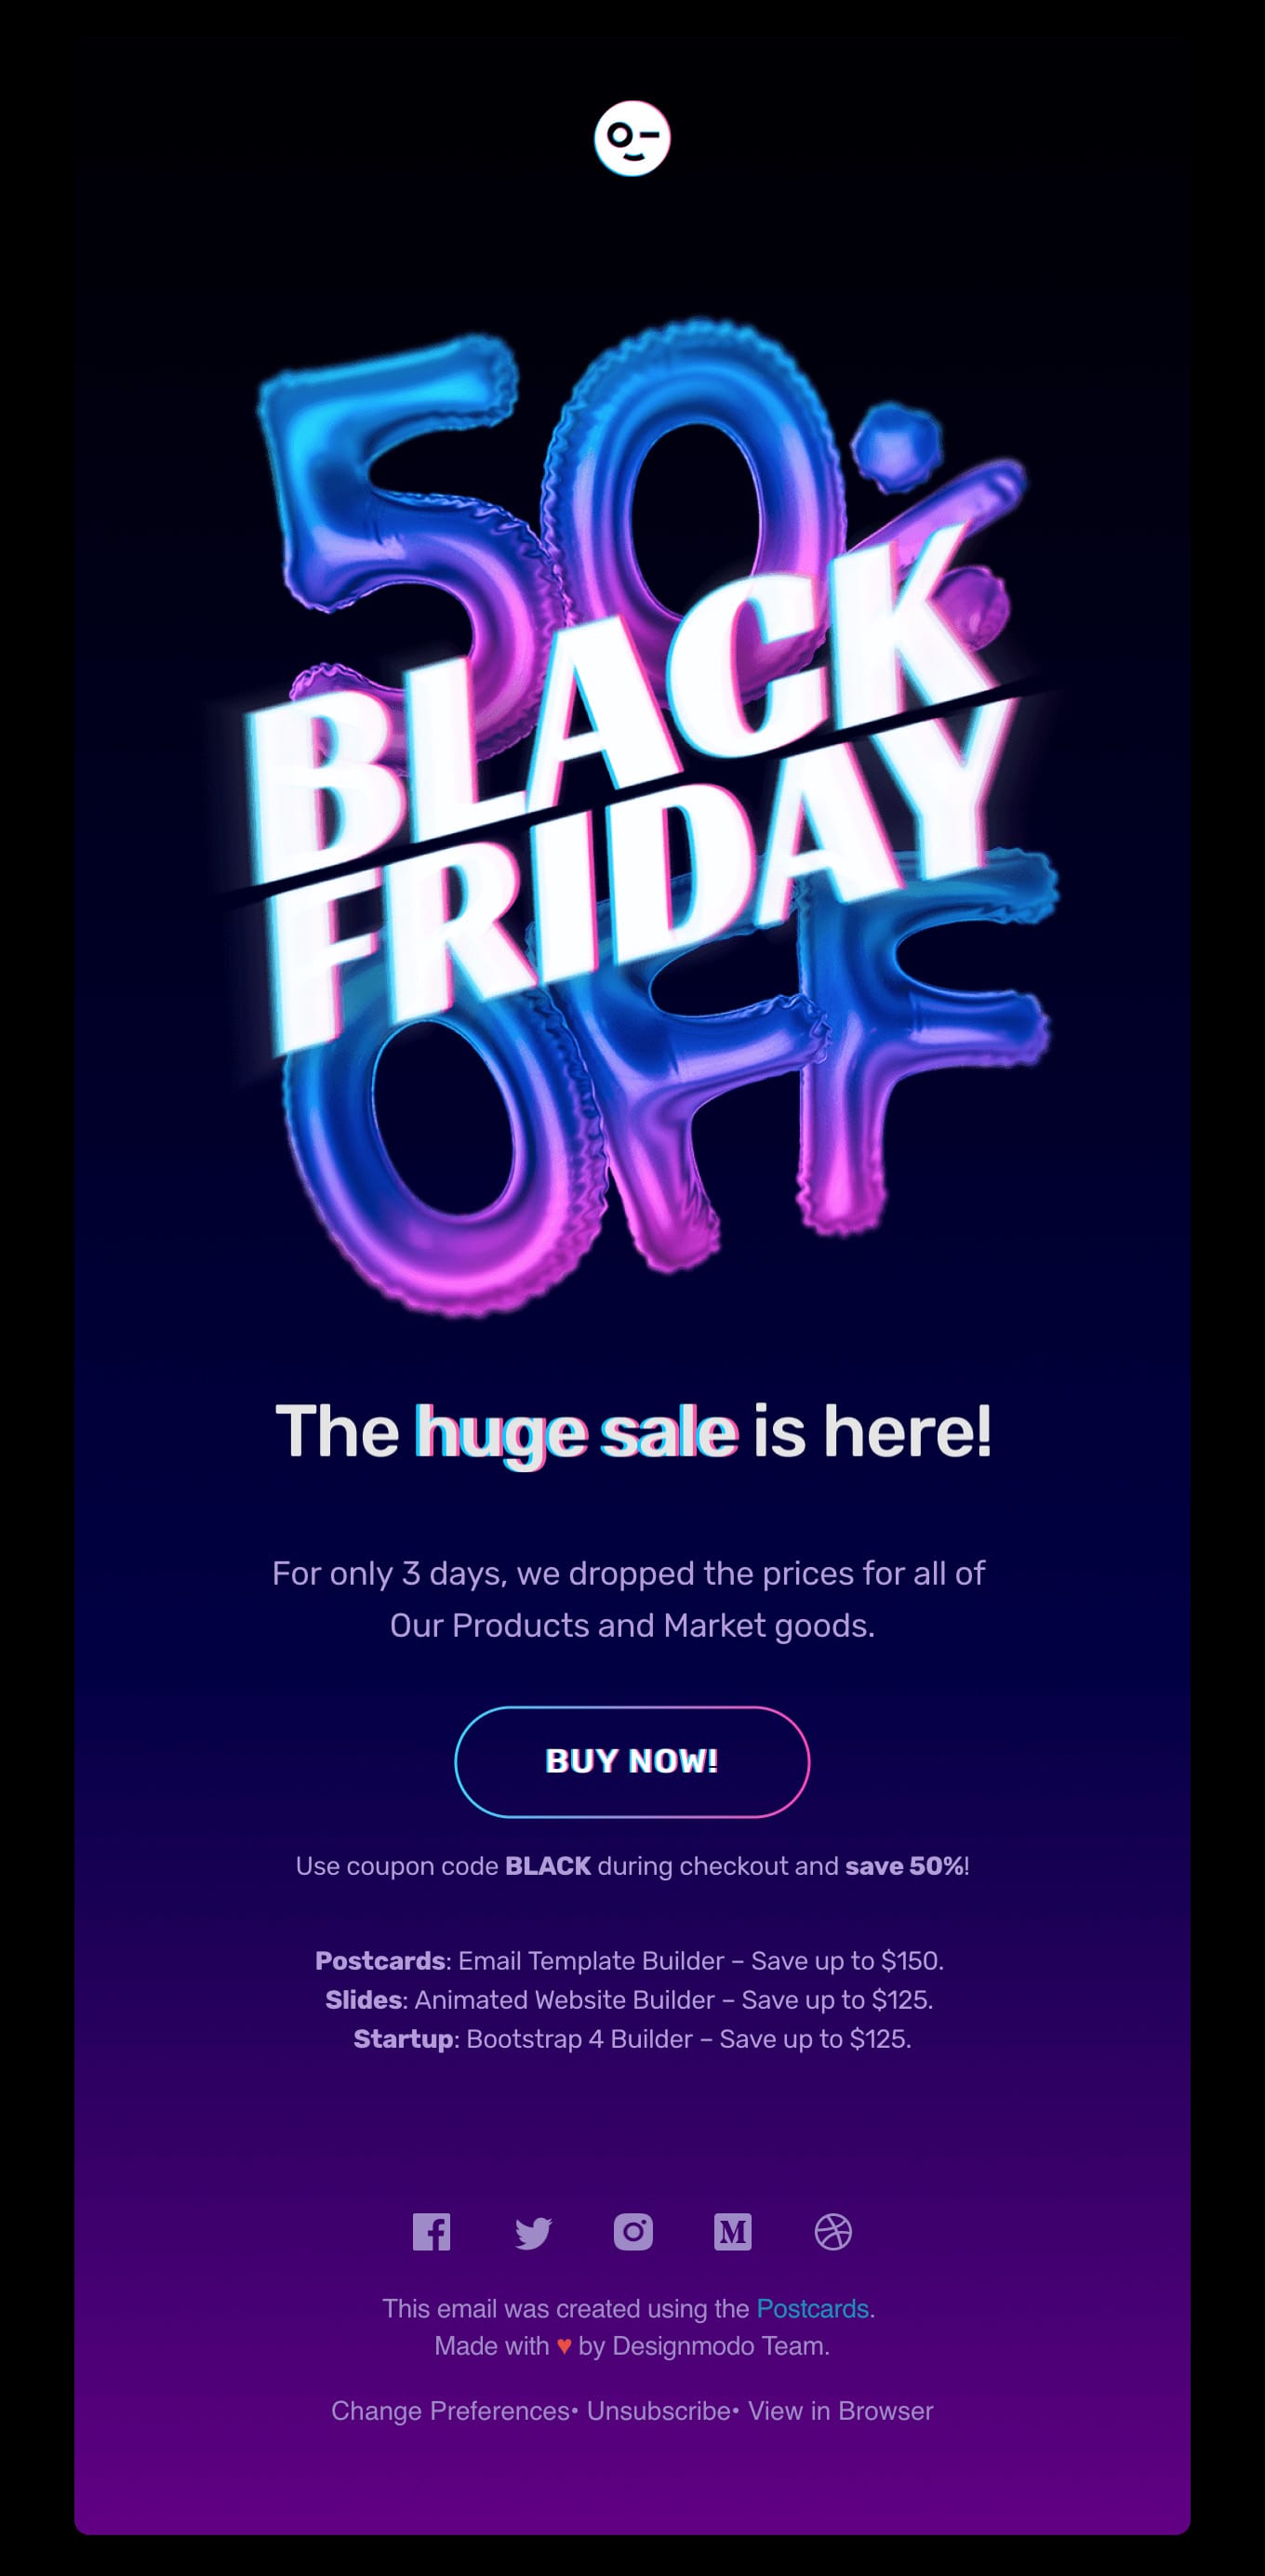 BLACK FRIDAY: 50% discount on ALL Designmodo products. Award Winning Websites and Emails Builders Email Screenshot